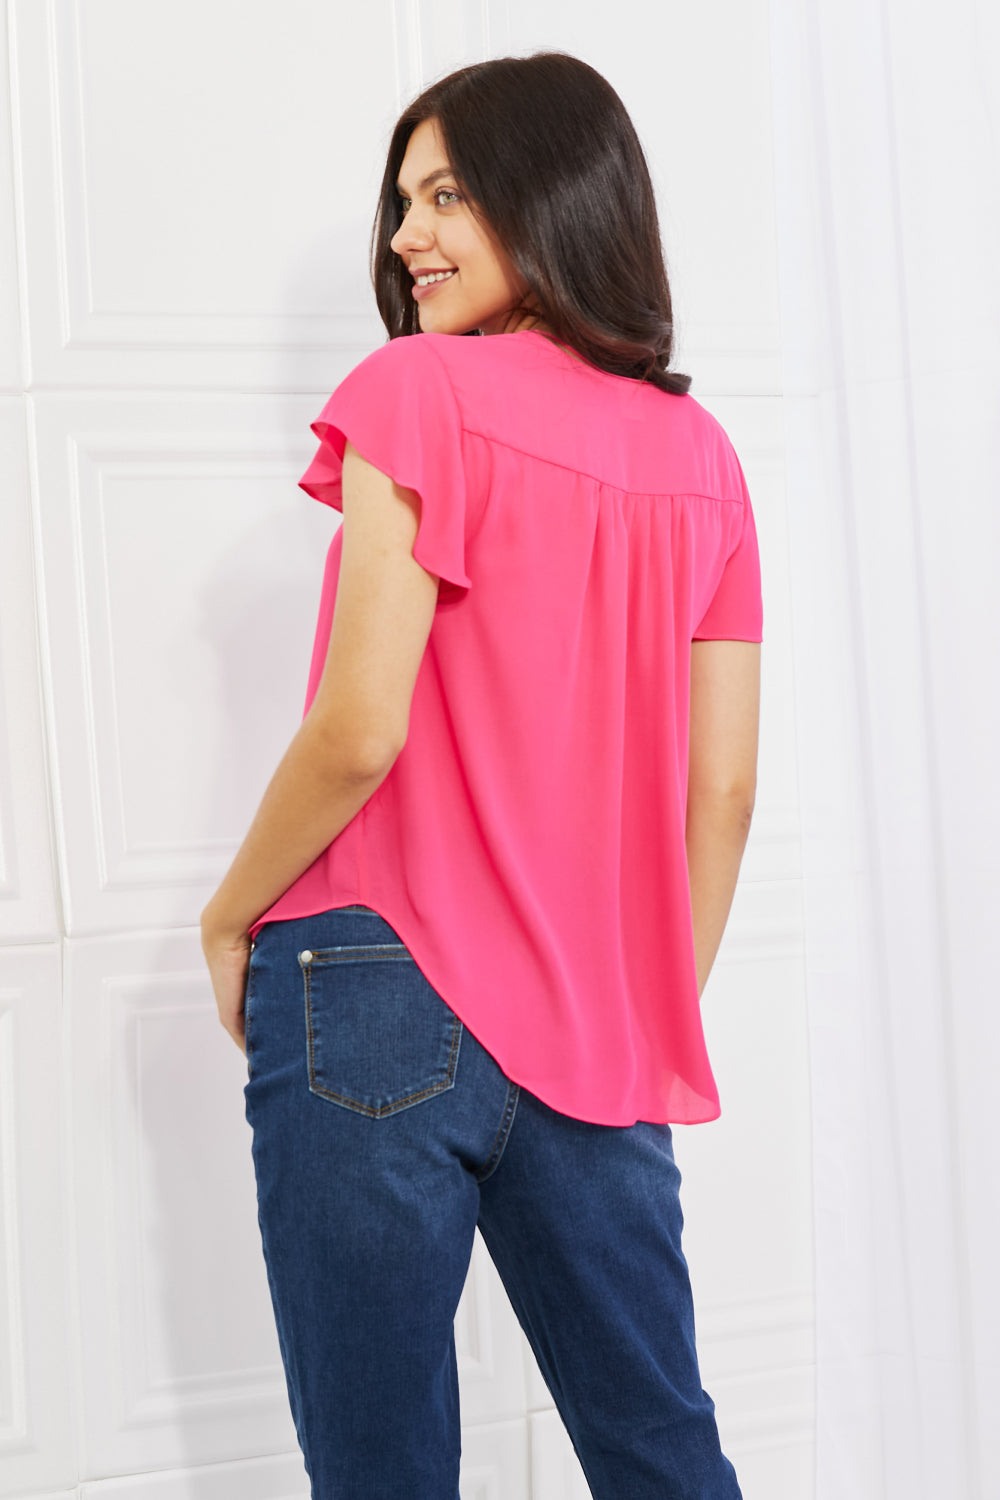 Sew In Love Just For You Short Ruffled sleeve length Top in Hot Pink - Online Only